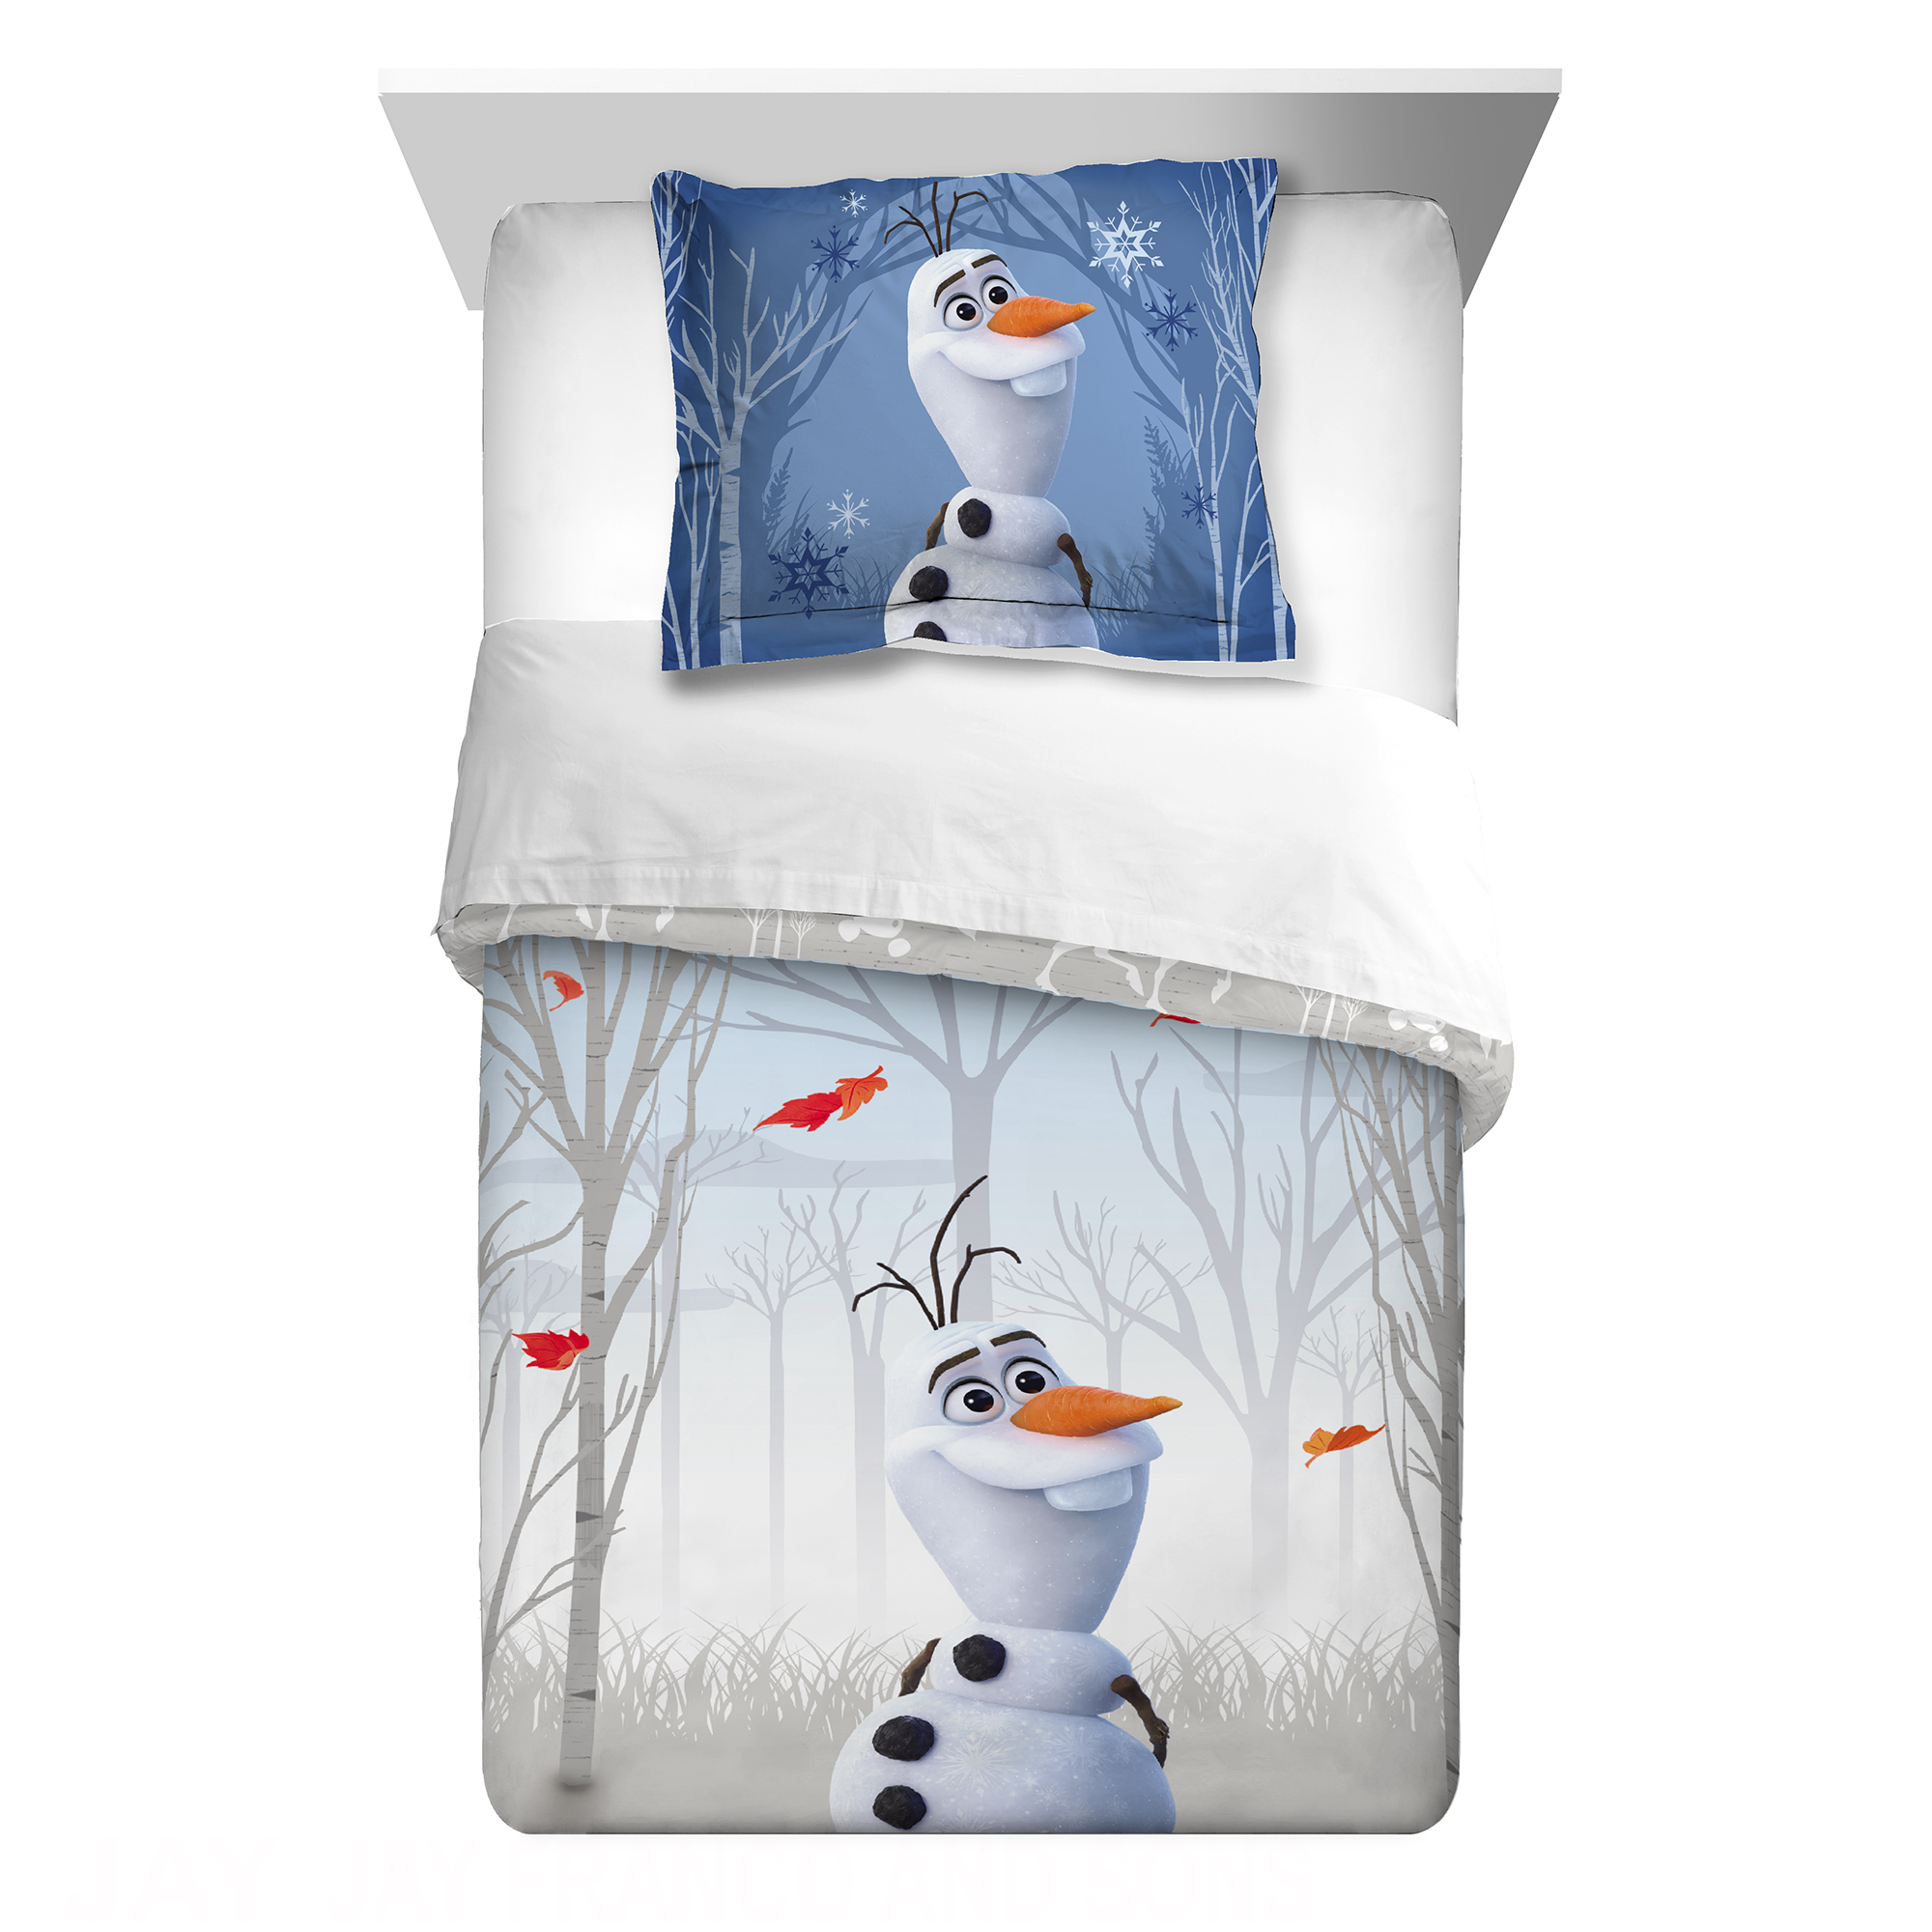 Disney Frozen Olaf Kids Comforter and Sham, 2-Piece Set, Twin/Full, Reversible, Gray - image 1 of 15